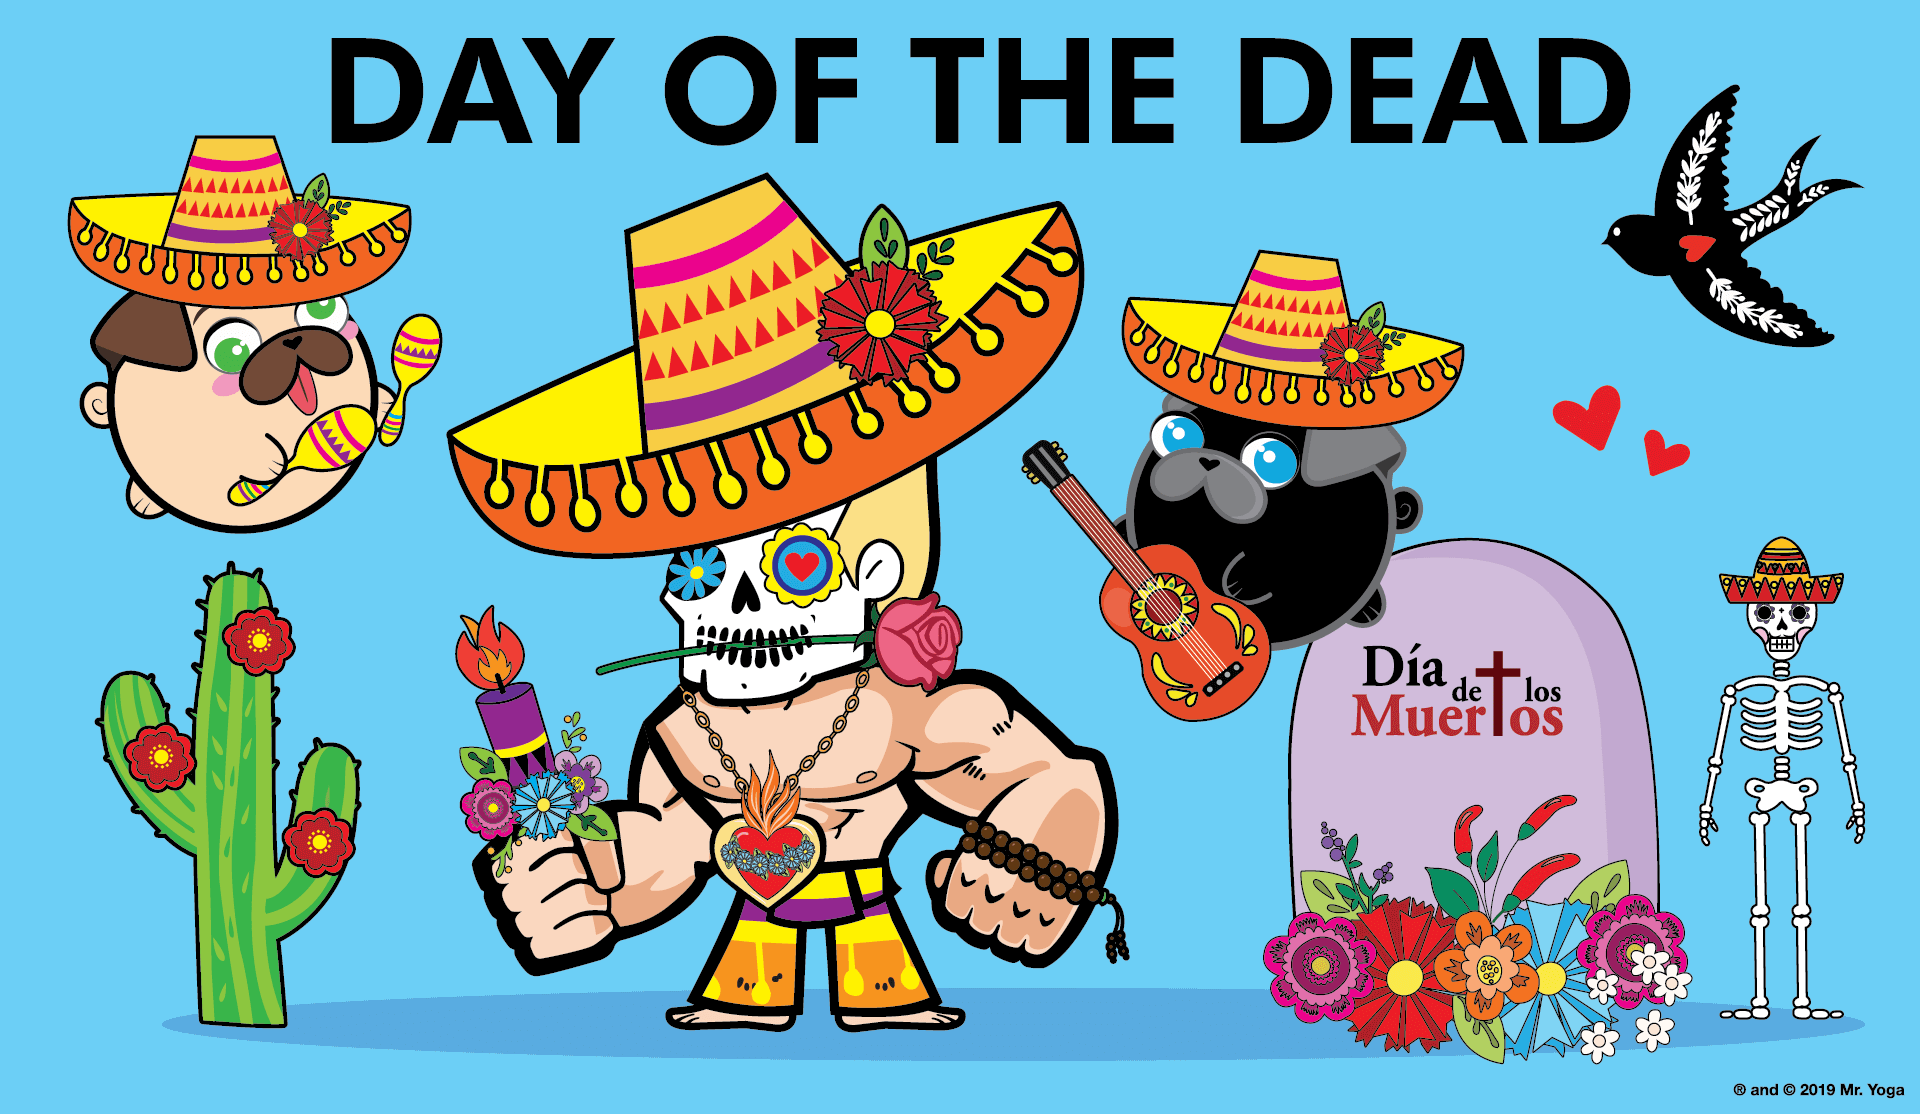 Mister Yoga - Day of the Dead